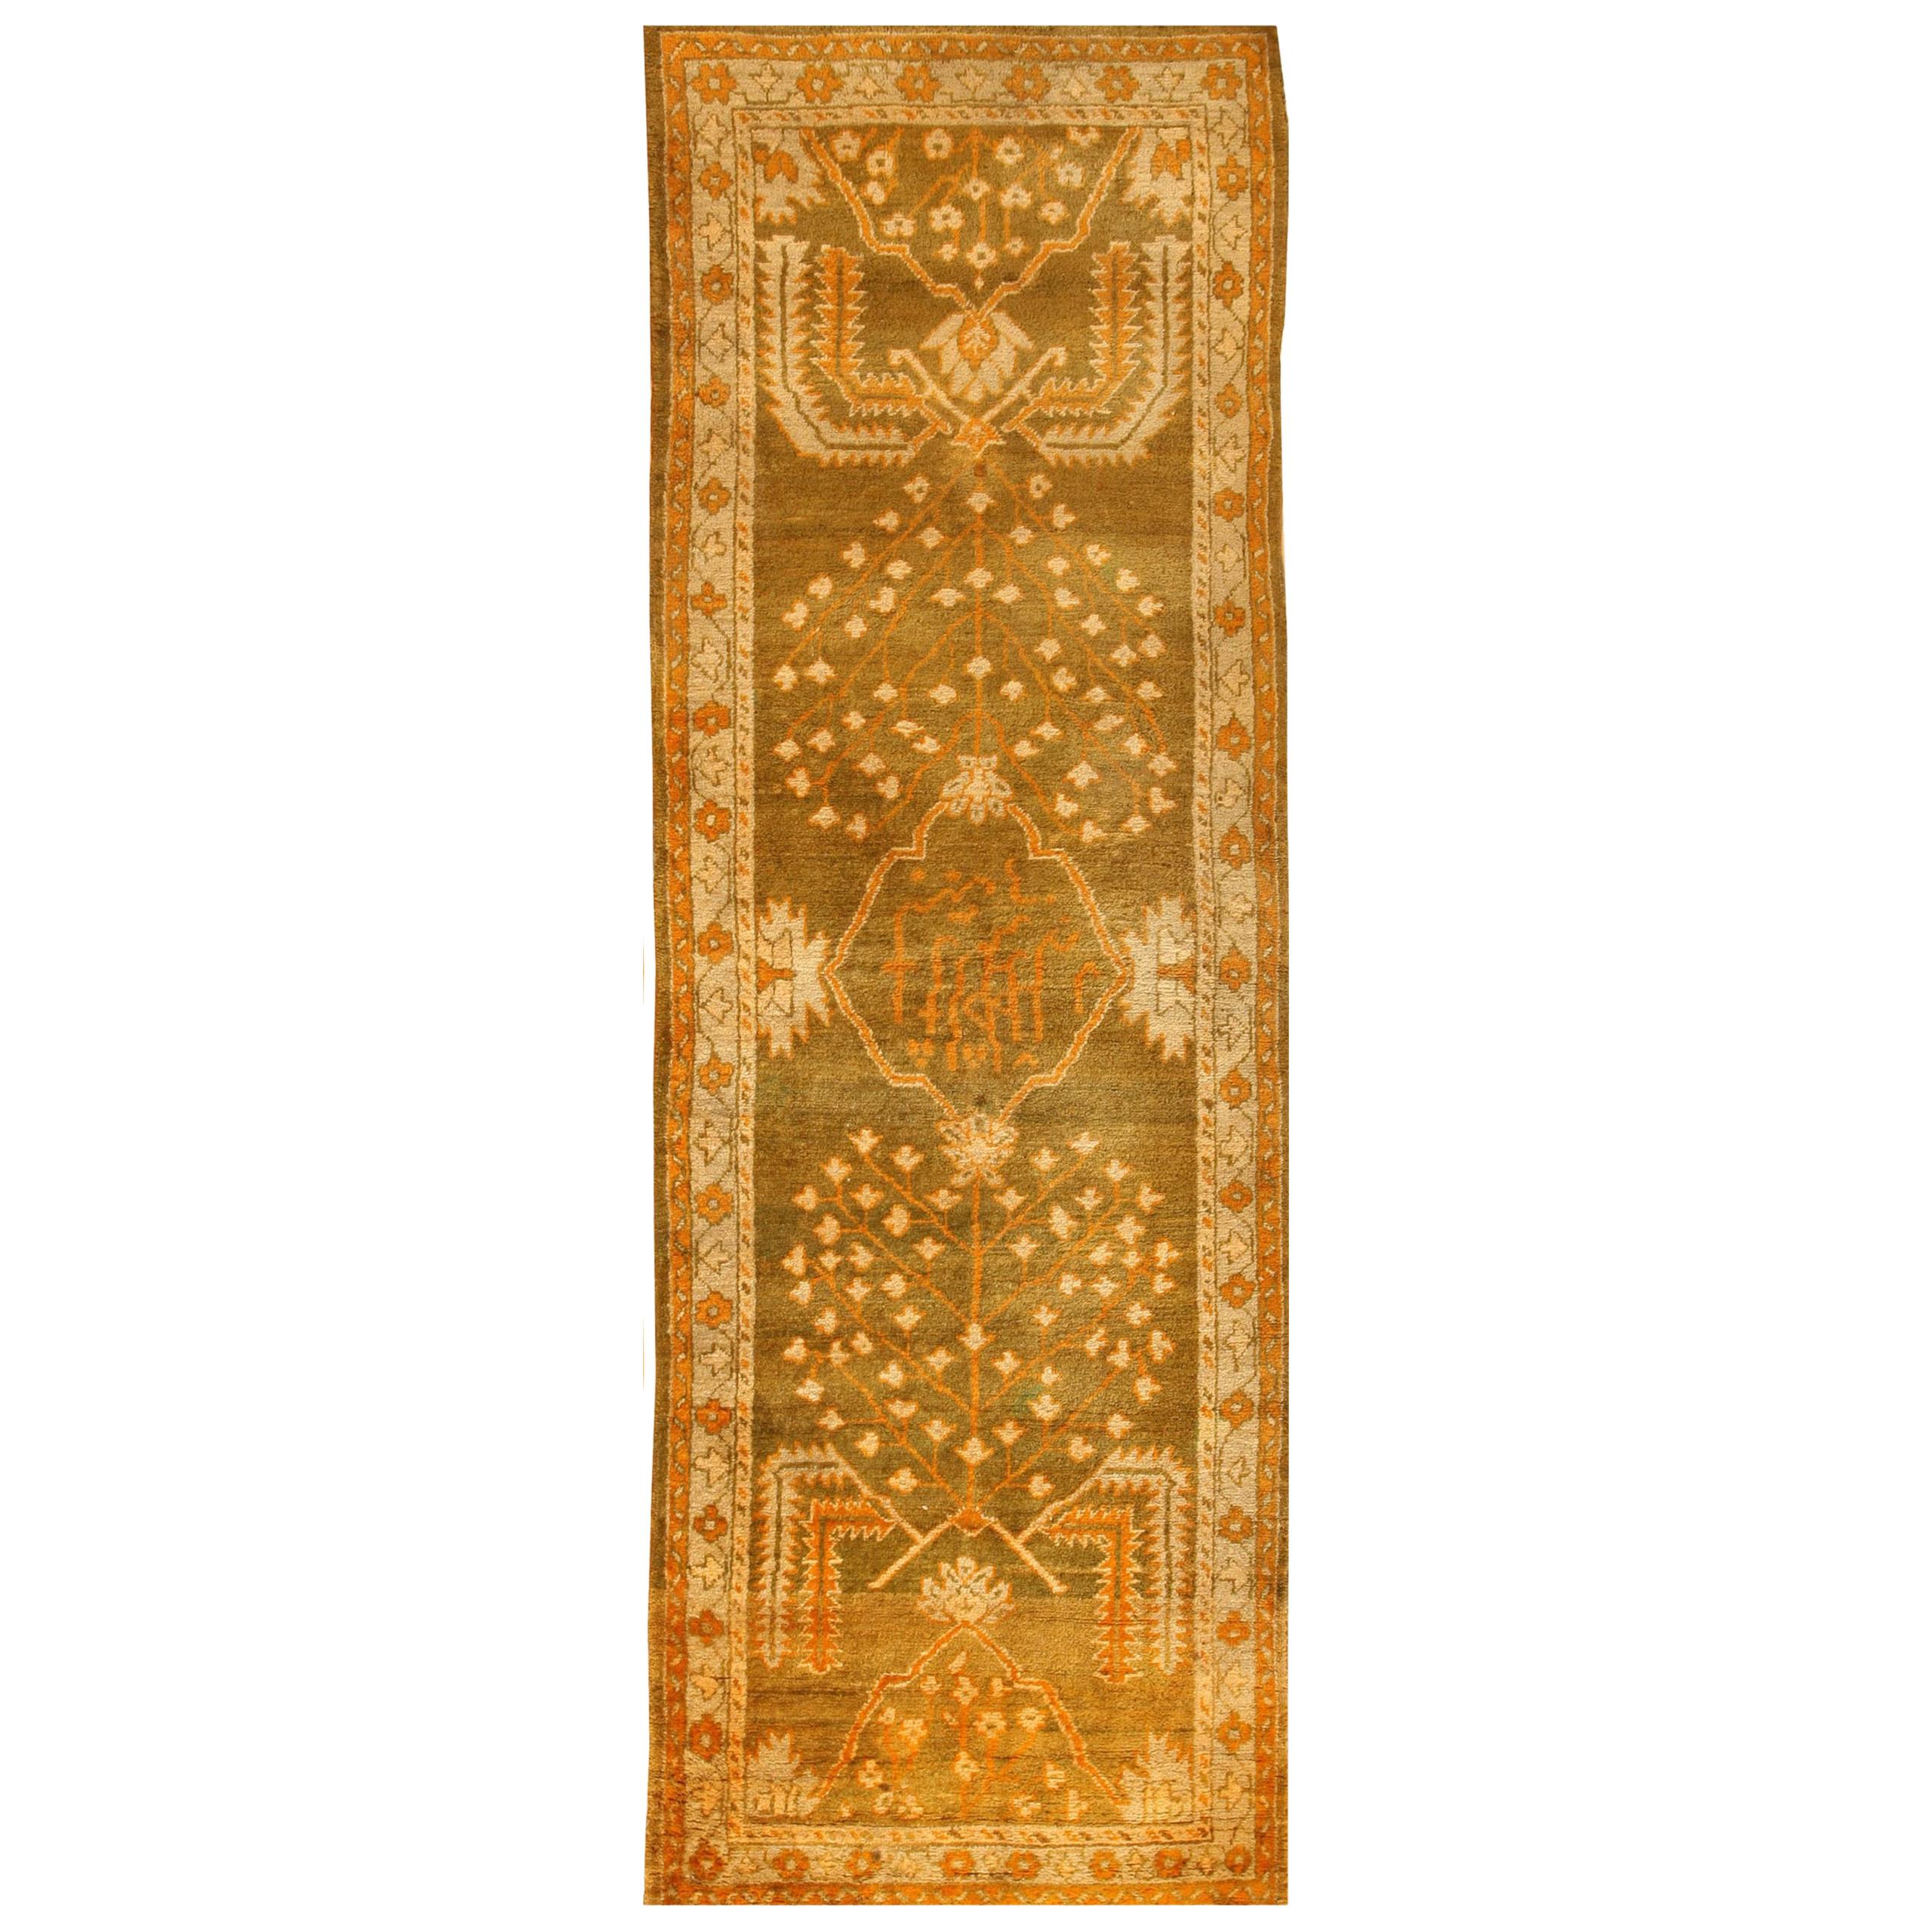 Nazmiyal Collection Antique Turkish Oushak Runner. 3 ft 10 in x 11 ft 10 in